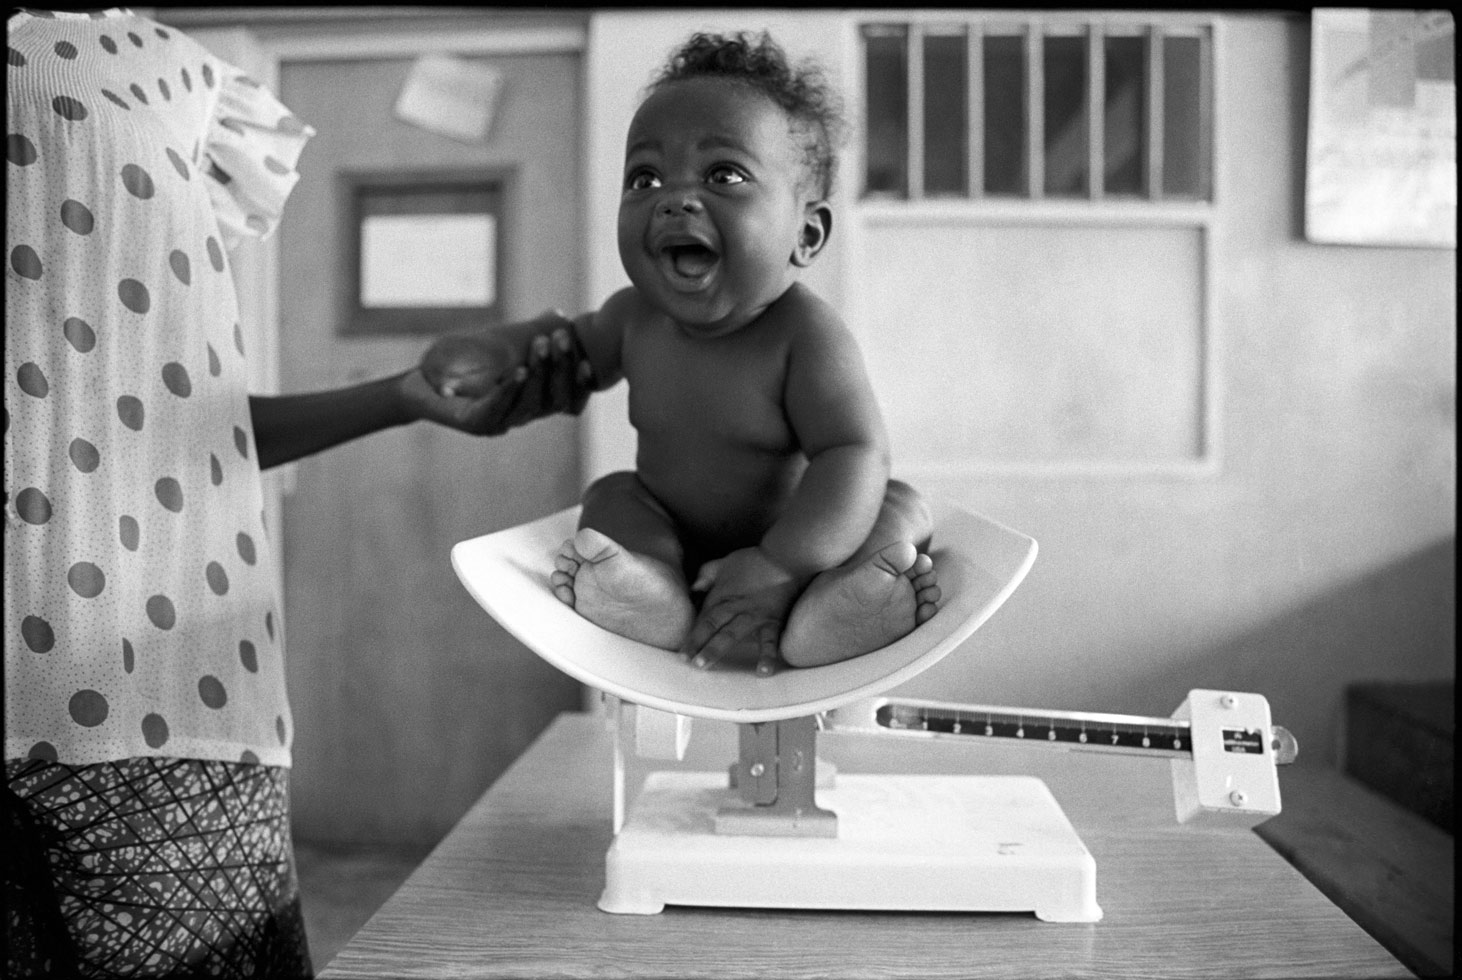 "Children are the reward of life." Congolese proverb

Maternal health clinics encourage mothers to bring their children for checkups as a way to improve the health of mothers and children. 

Kigali, Rwanda, 1993